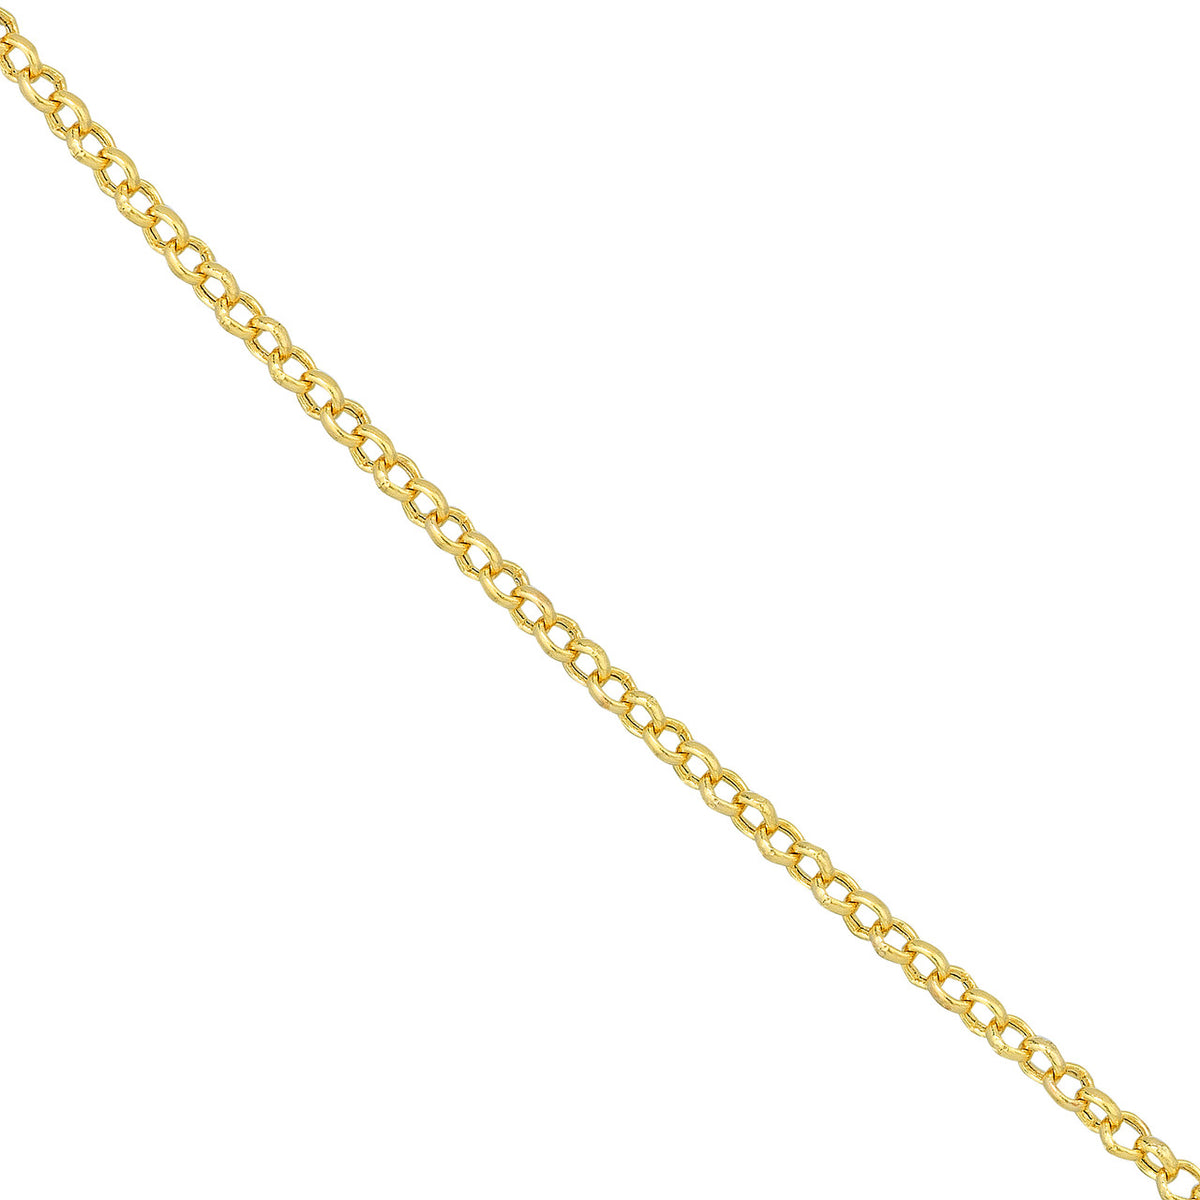 14K Yellow Gold or White Gold or Rose Gold 1.5mm Rolo Chain Necklace with Lobster Lock